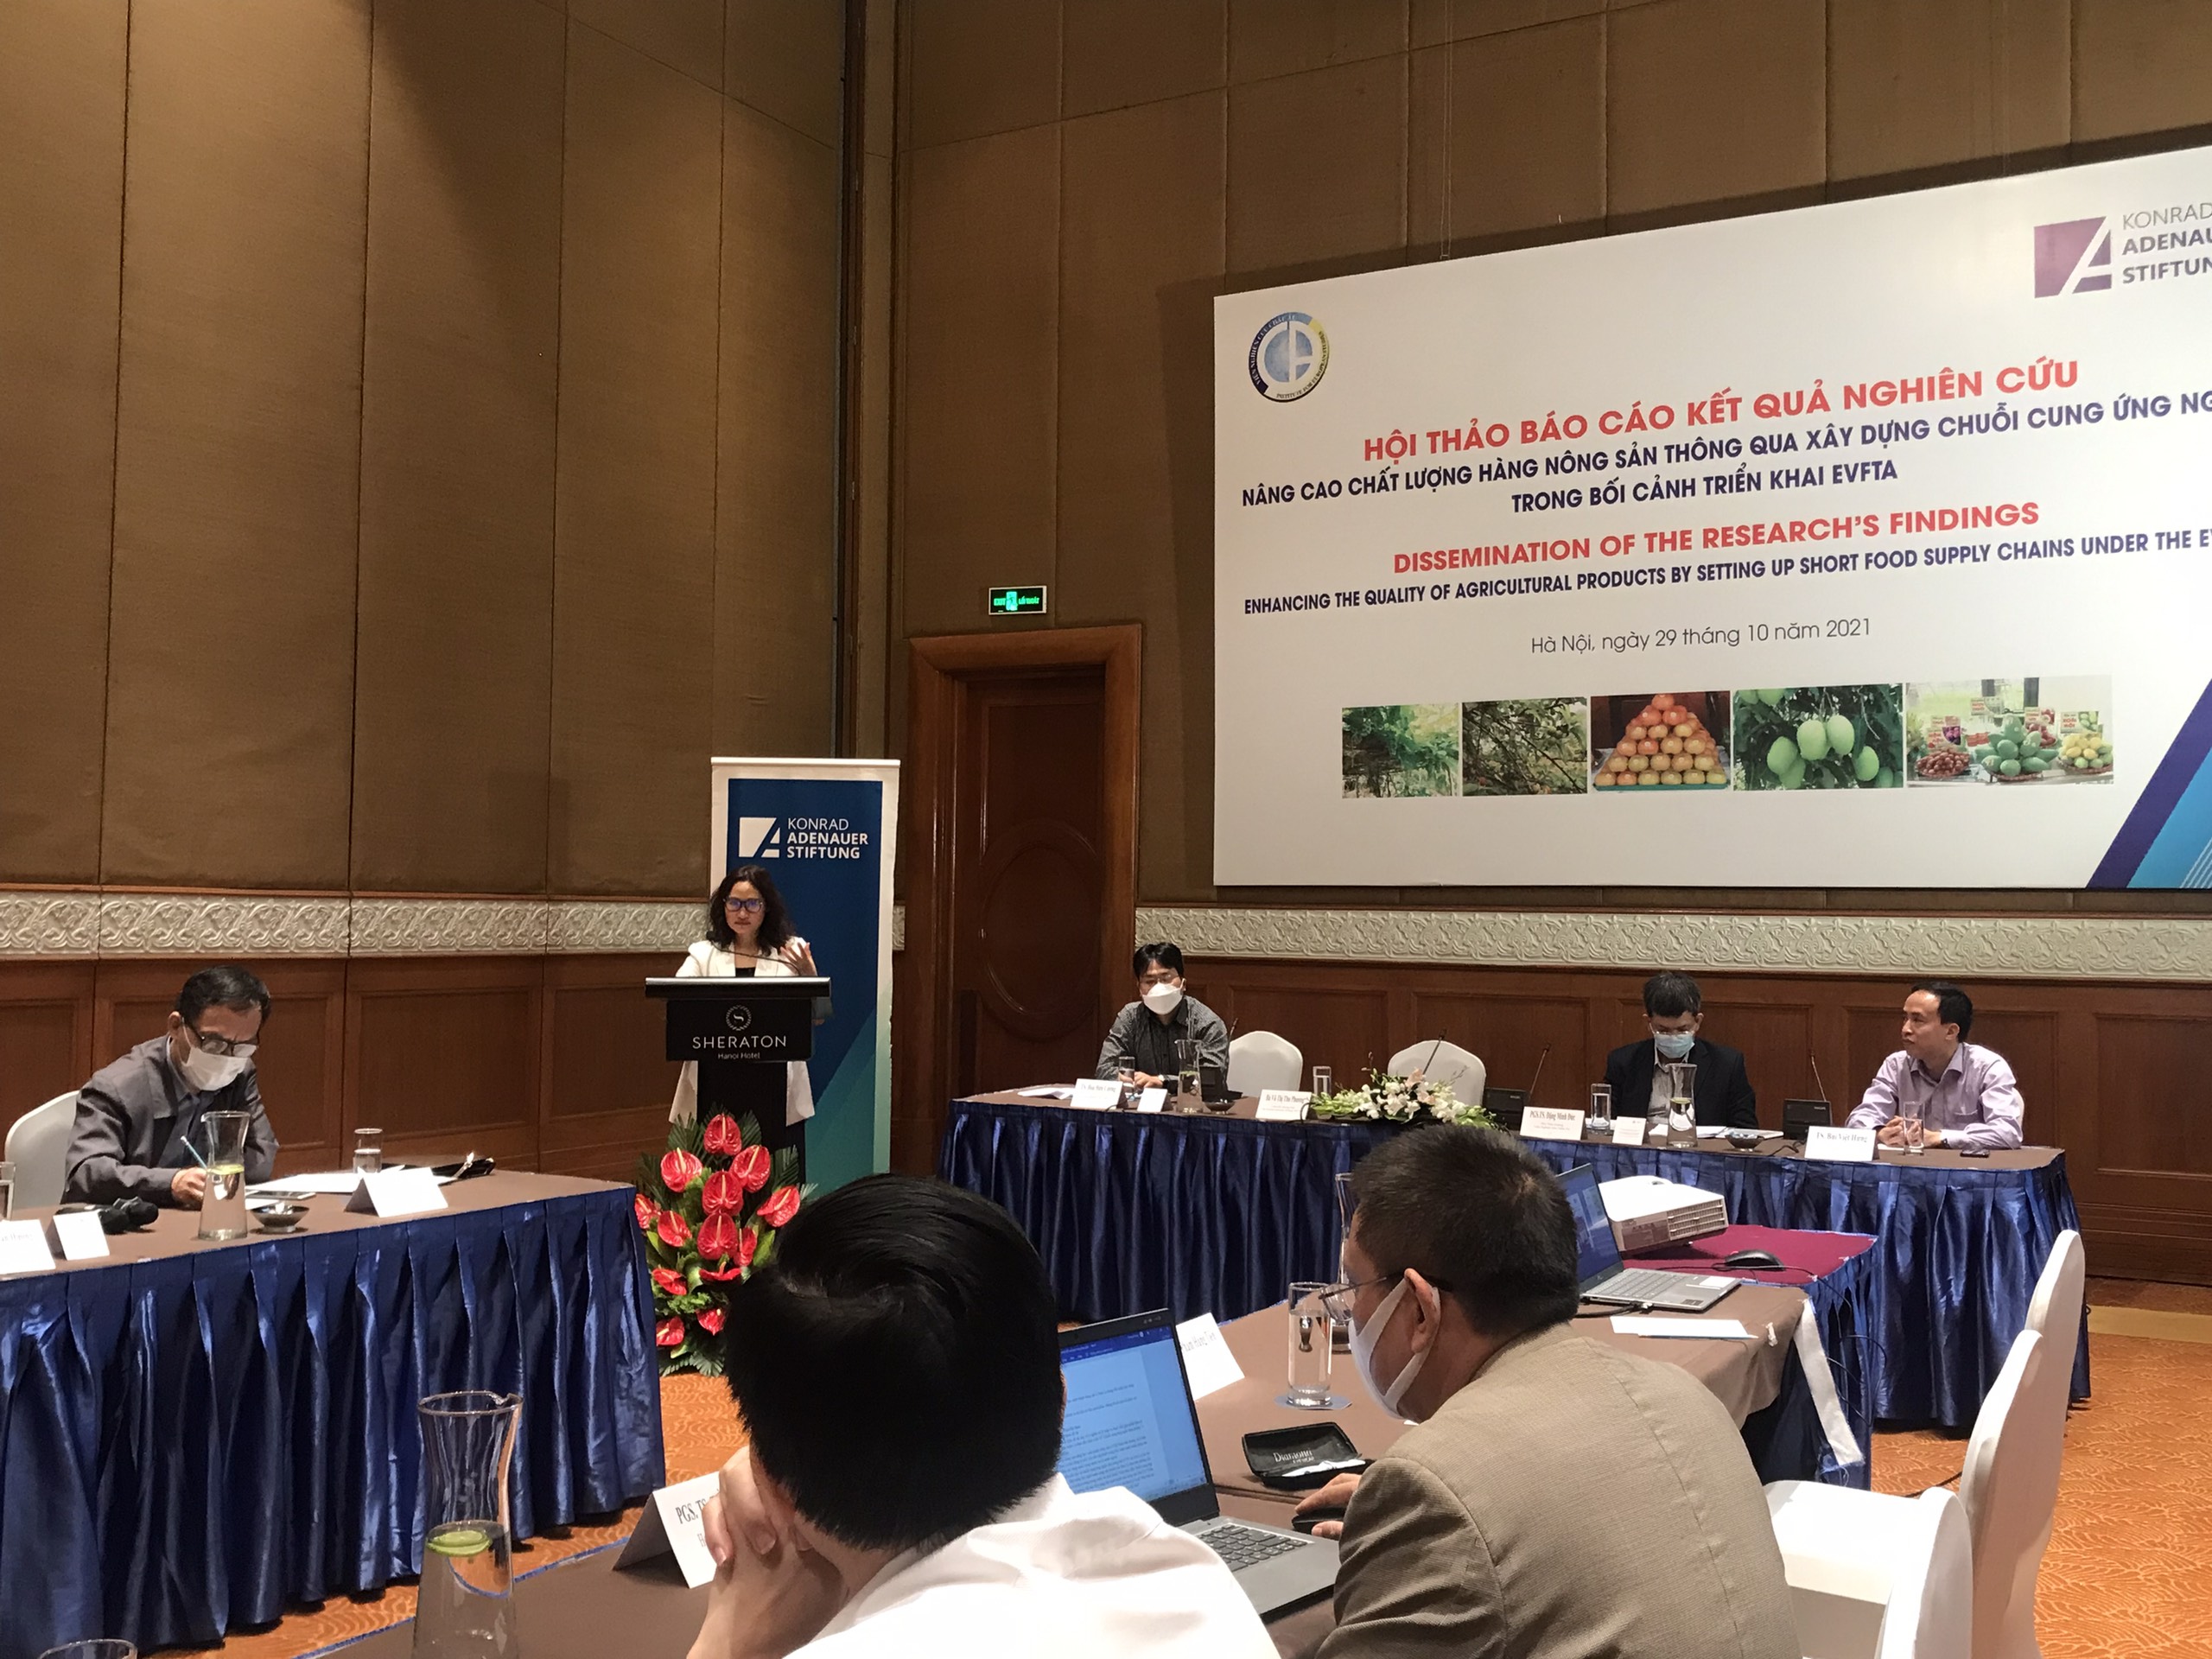 Ms. Vu Thi Thu Phuong, Program Director, KAS Office in Vietnam speaking at the Workshop